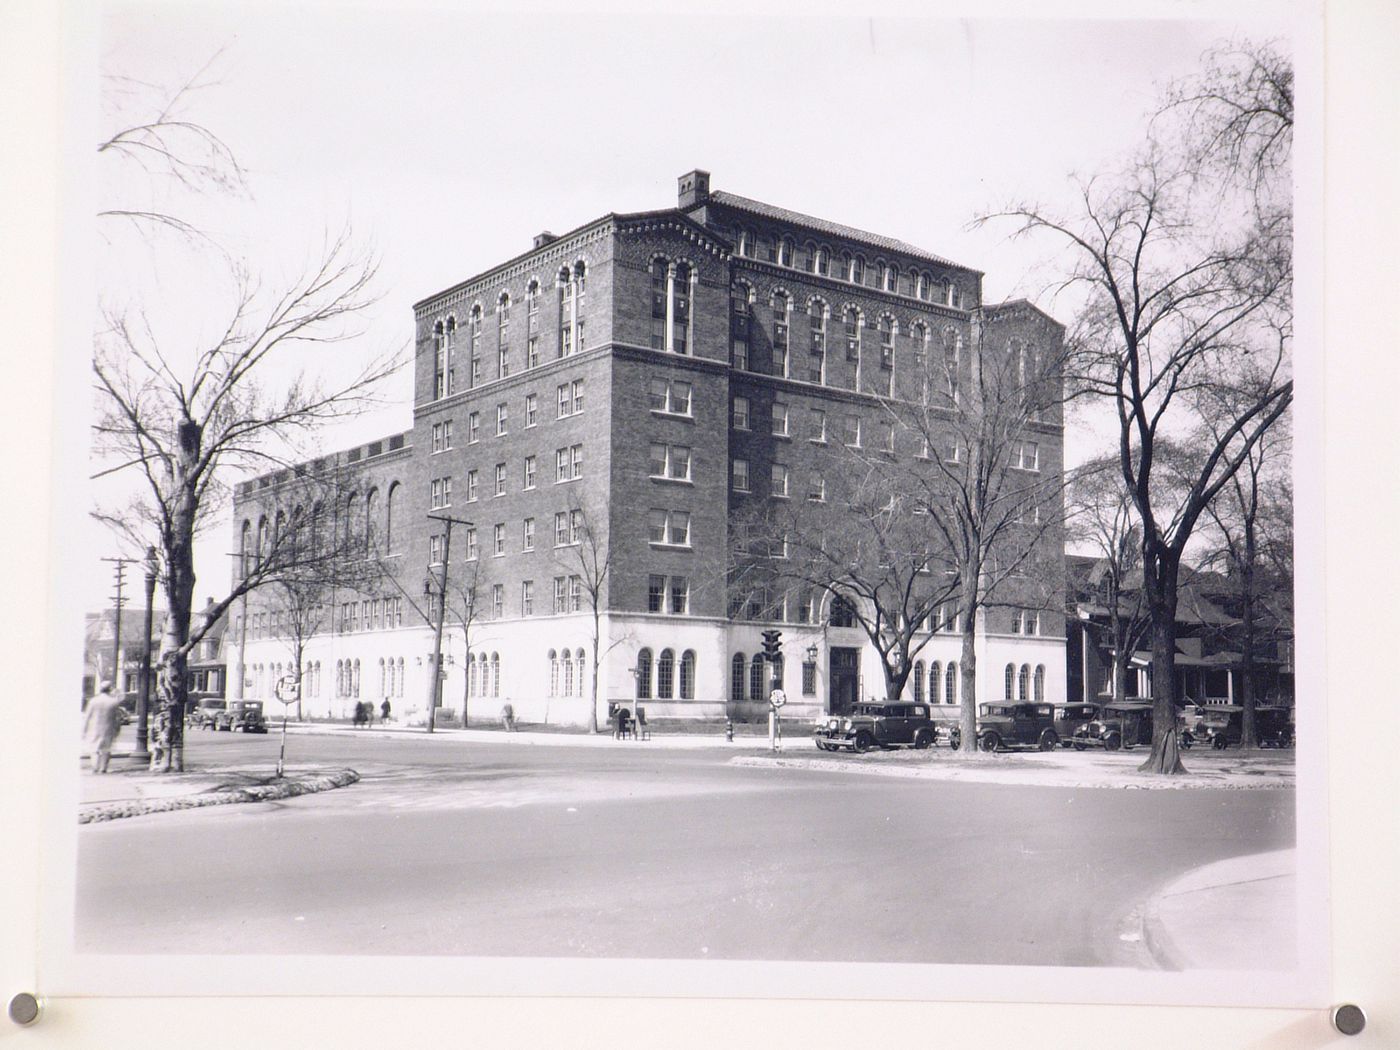 View of the principal and lateral façades of the North Branch of the YMCA (now demolished), Grand Boulevard and Dexter Streets, Detroit, Michigan